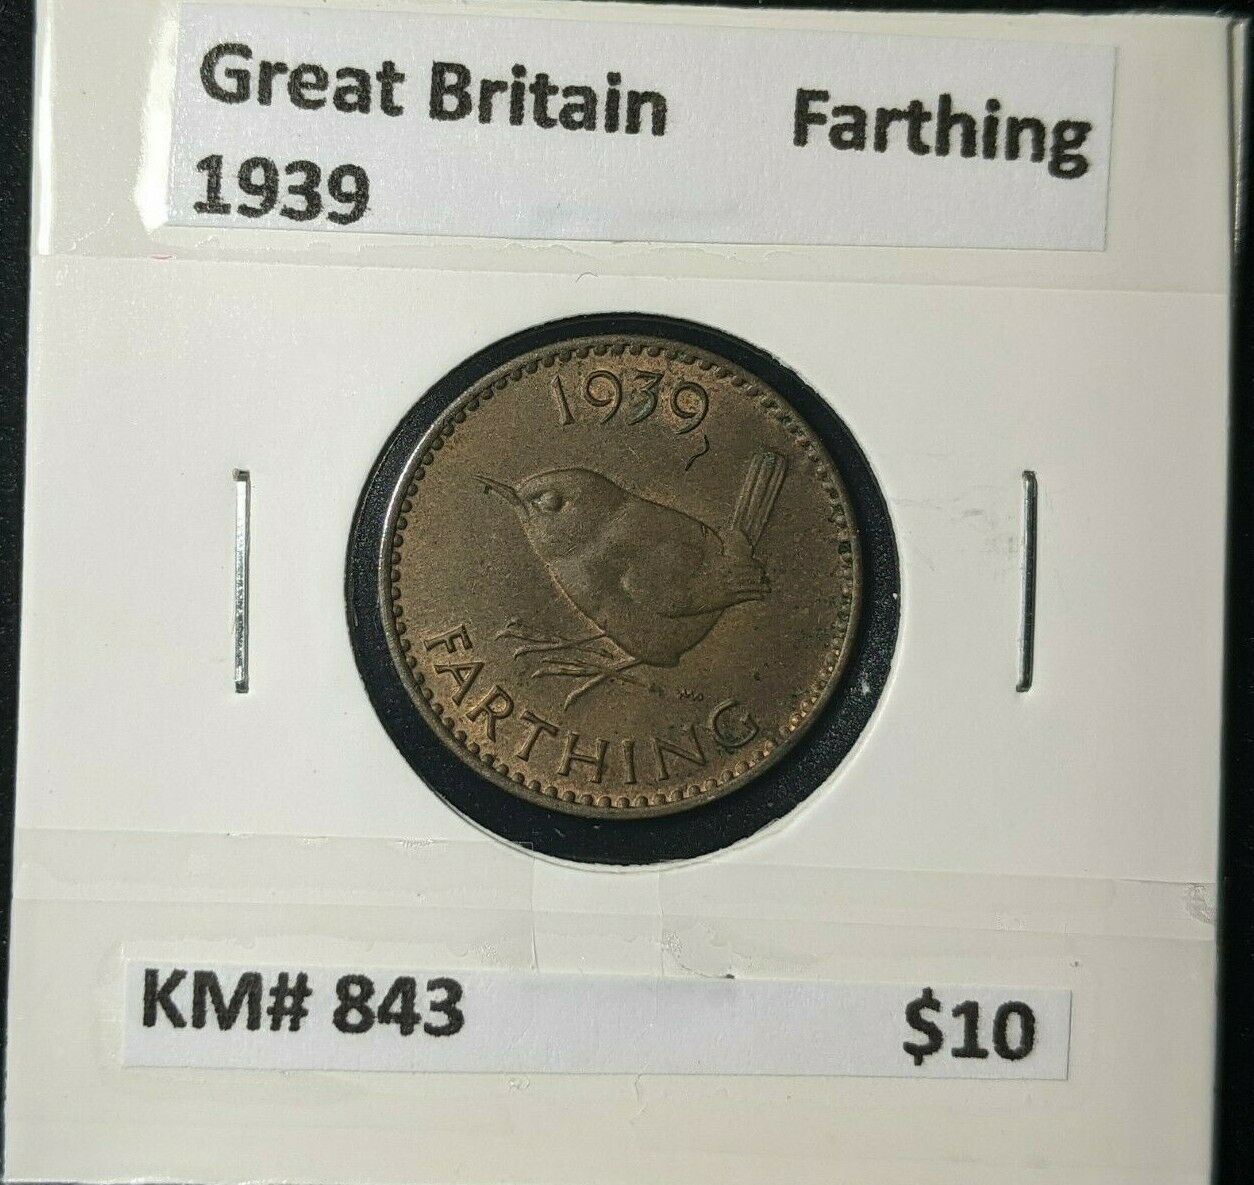 Great Britain 1939 1/4d Farthing KM# 843 #014